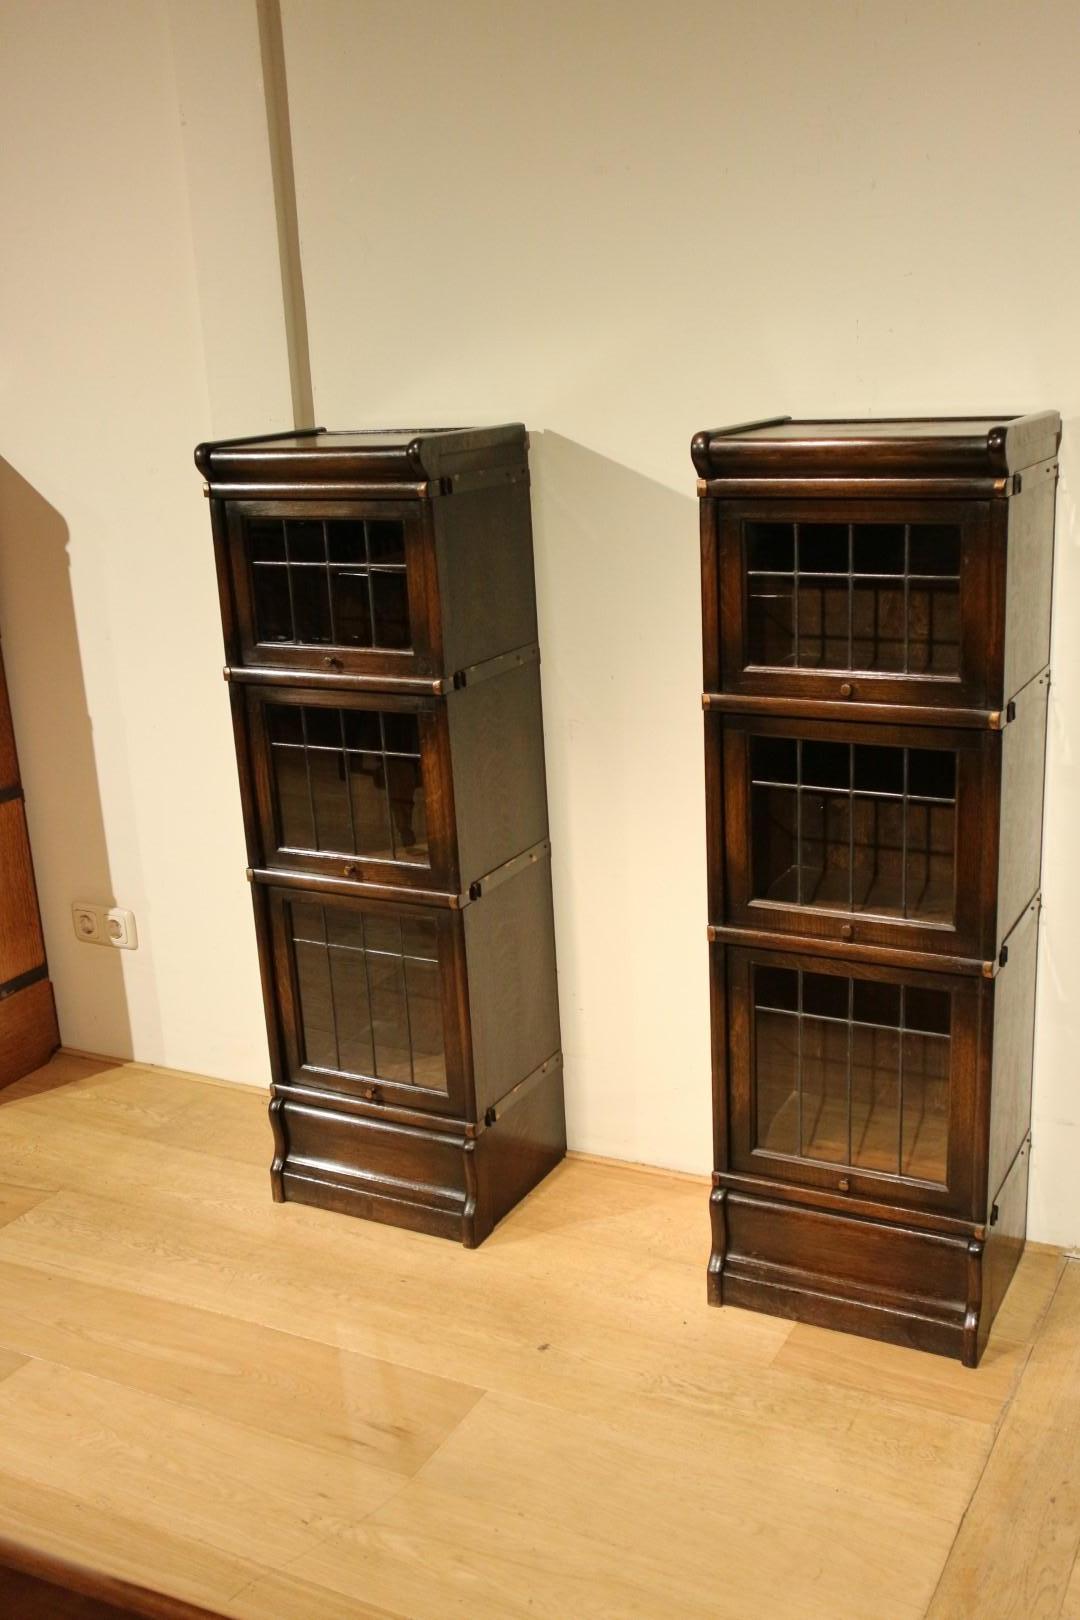 Special oak Globe Wernicke bookcases. They are 2 small cabinets that consist of 1 piece but can be linked together.
The cabinets are fitted with glass and lead. Entirely in original condition. cabinets have signs of wear.
Origin: England,